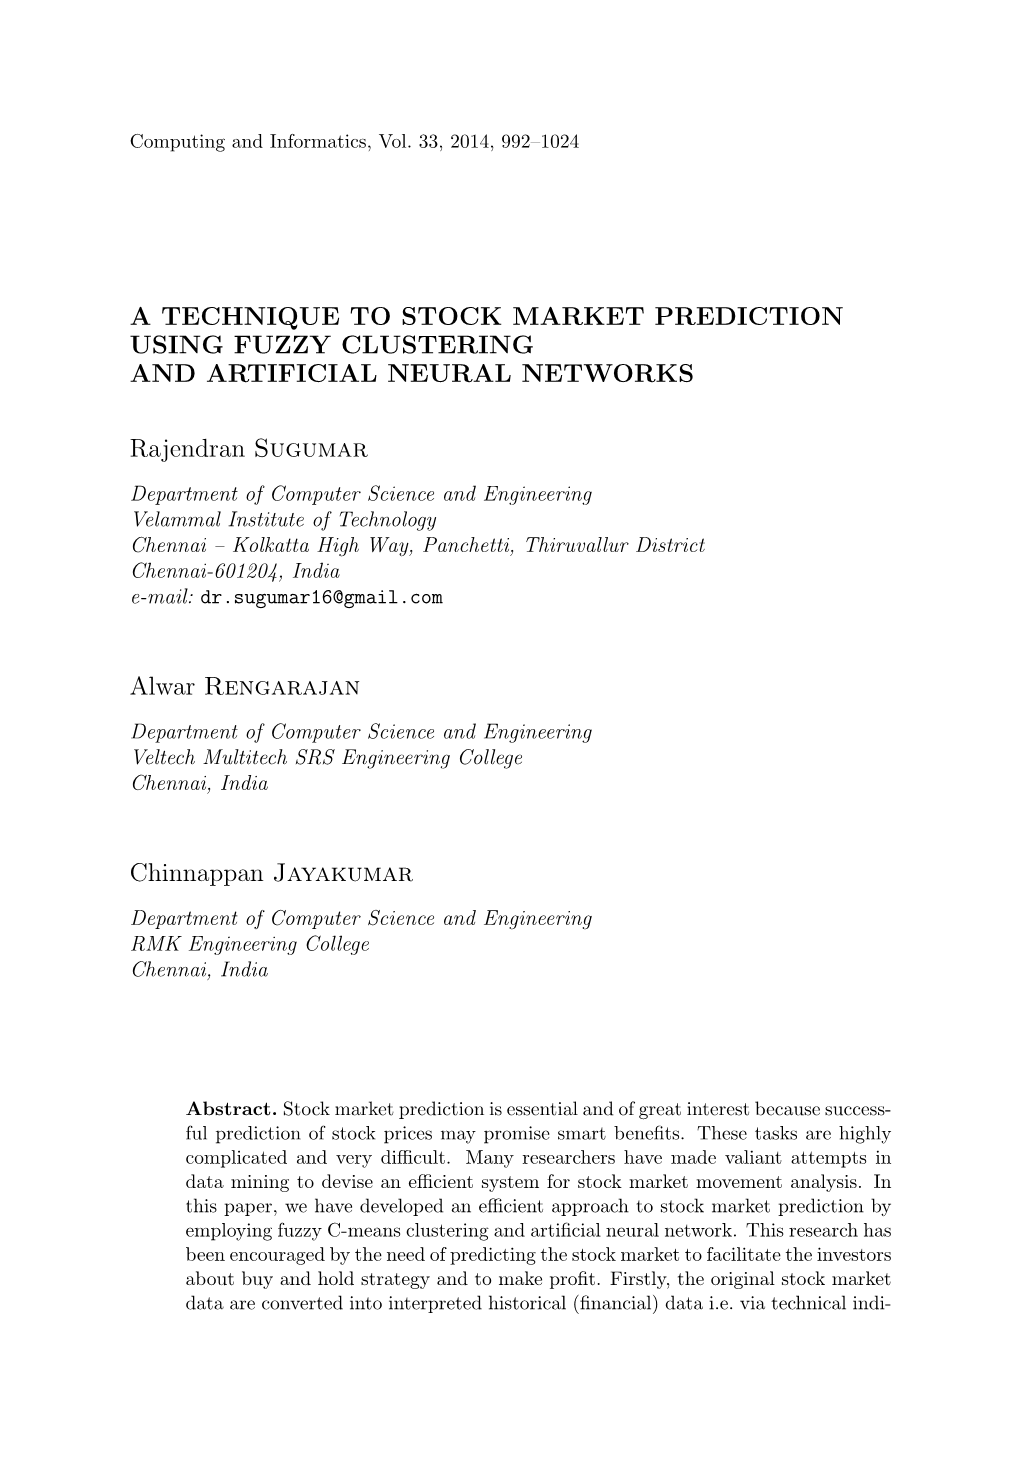 A Technique to Stock Market Prediction Using Fuzzy Clustering and Artificial Neural Networks